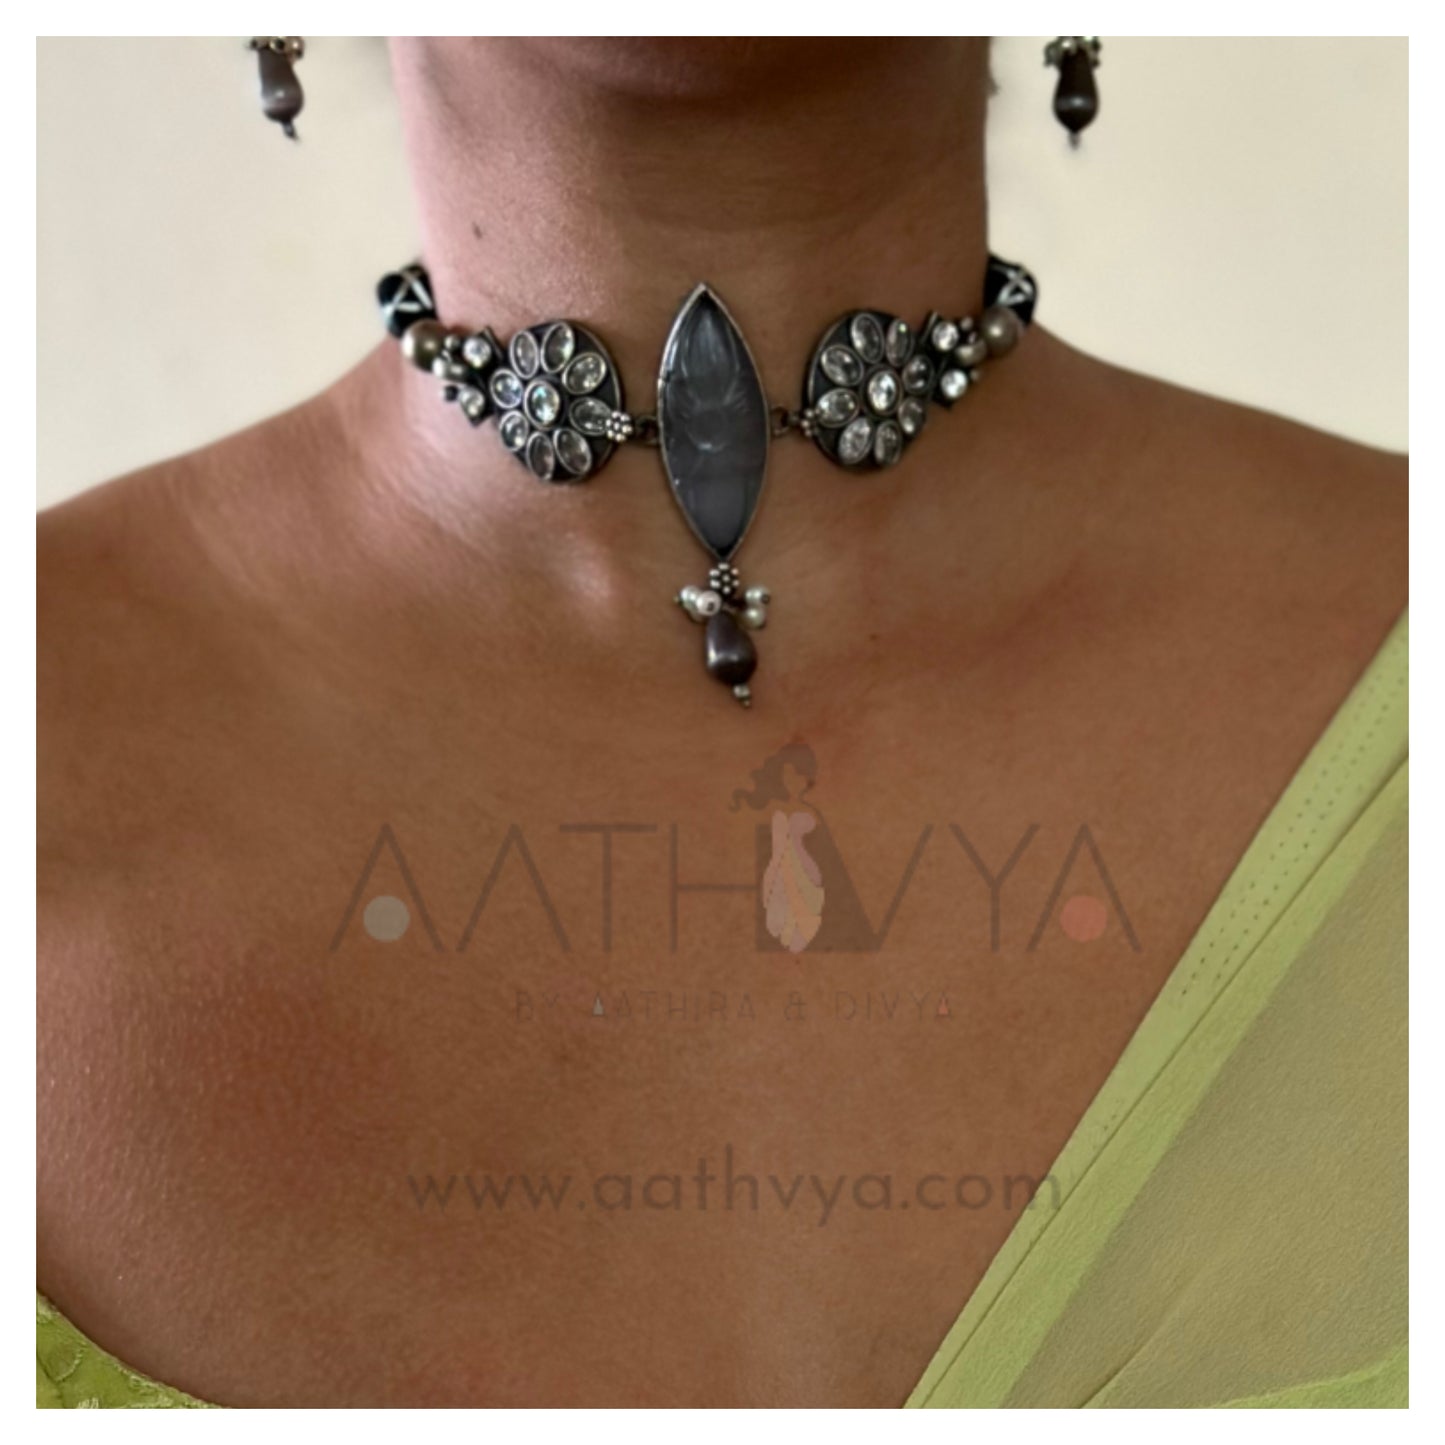 CARVED NATURAL STONE CHOKER - AN2179